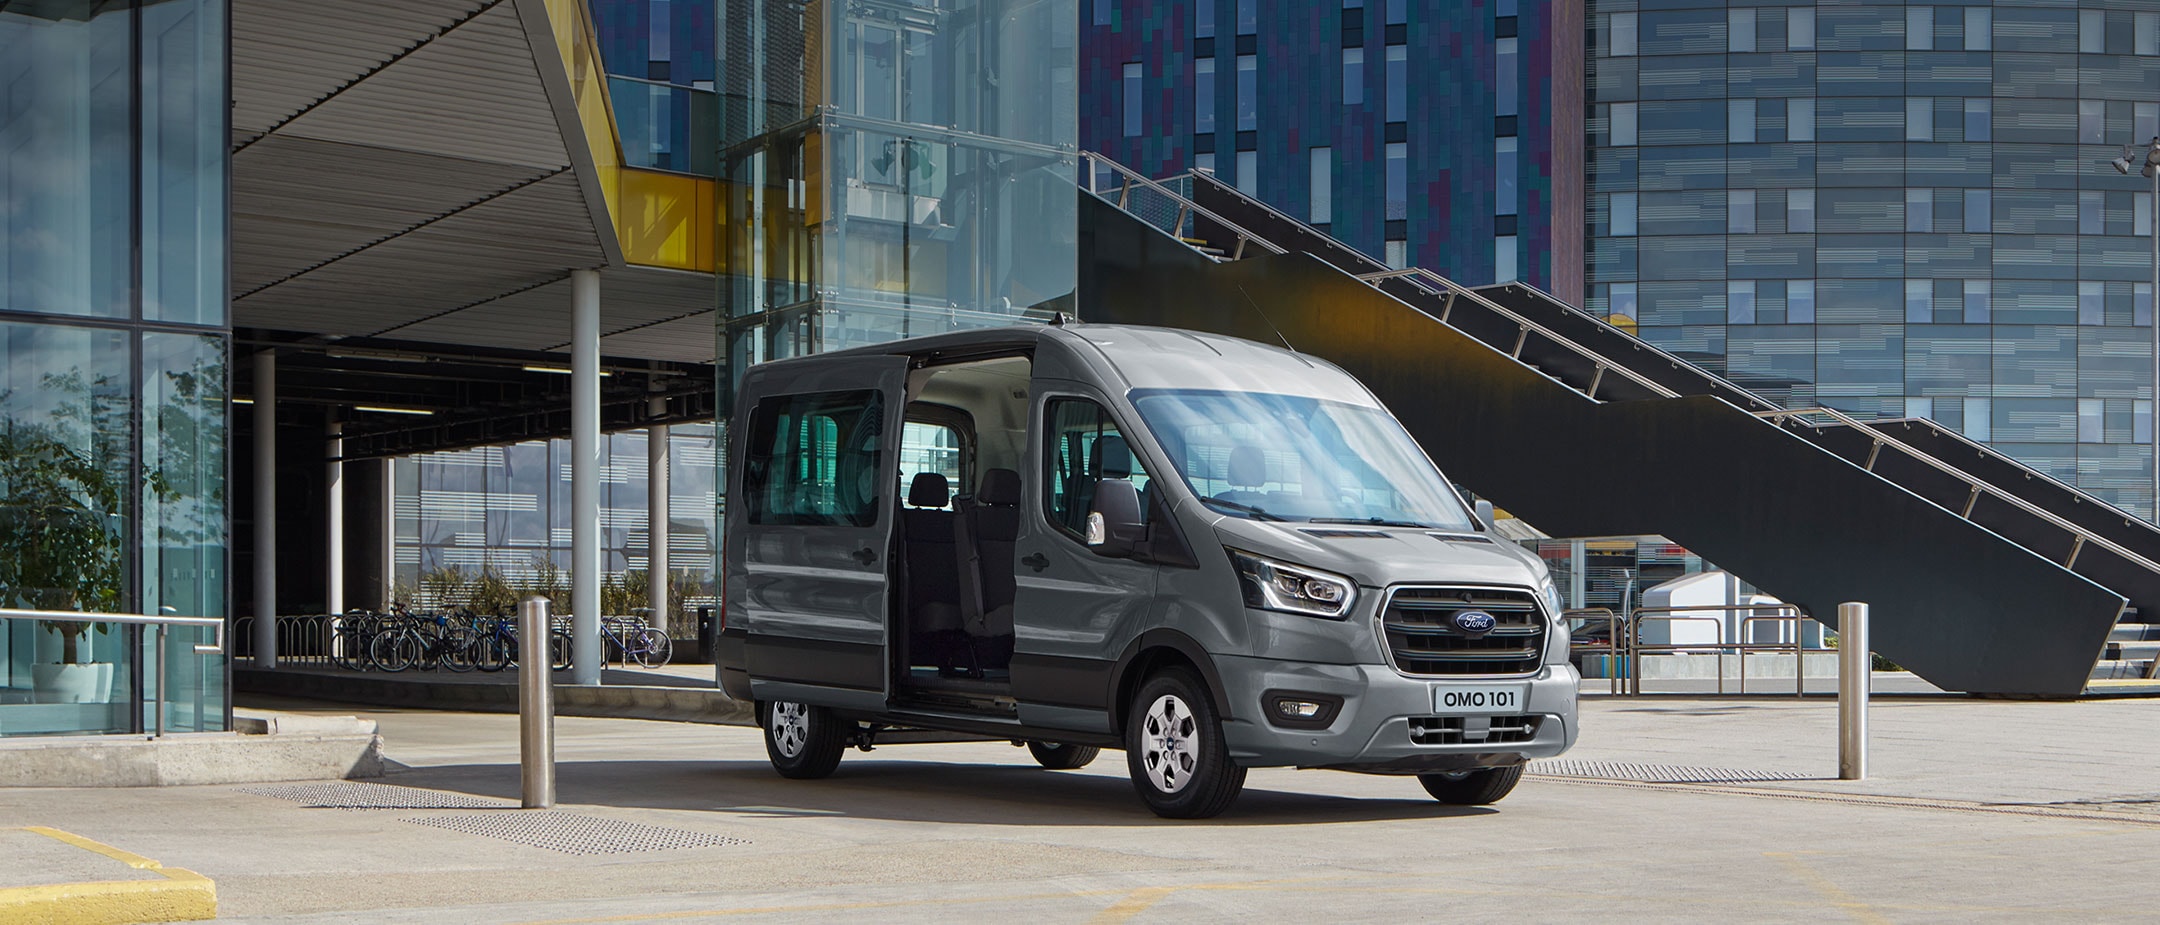 New Ford Transit Minibus parked in front of a modern building with the side door open